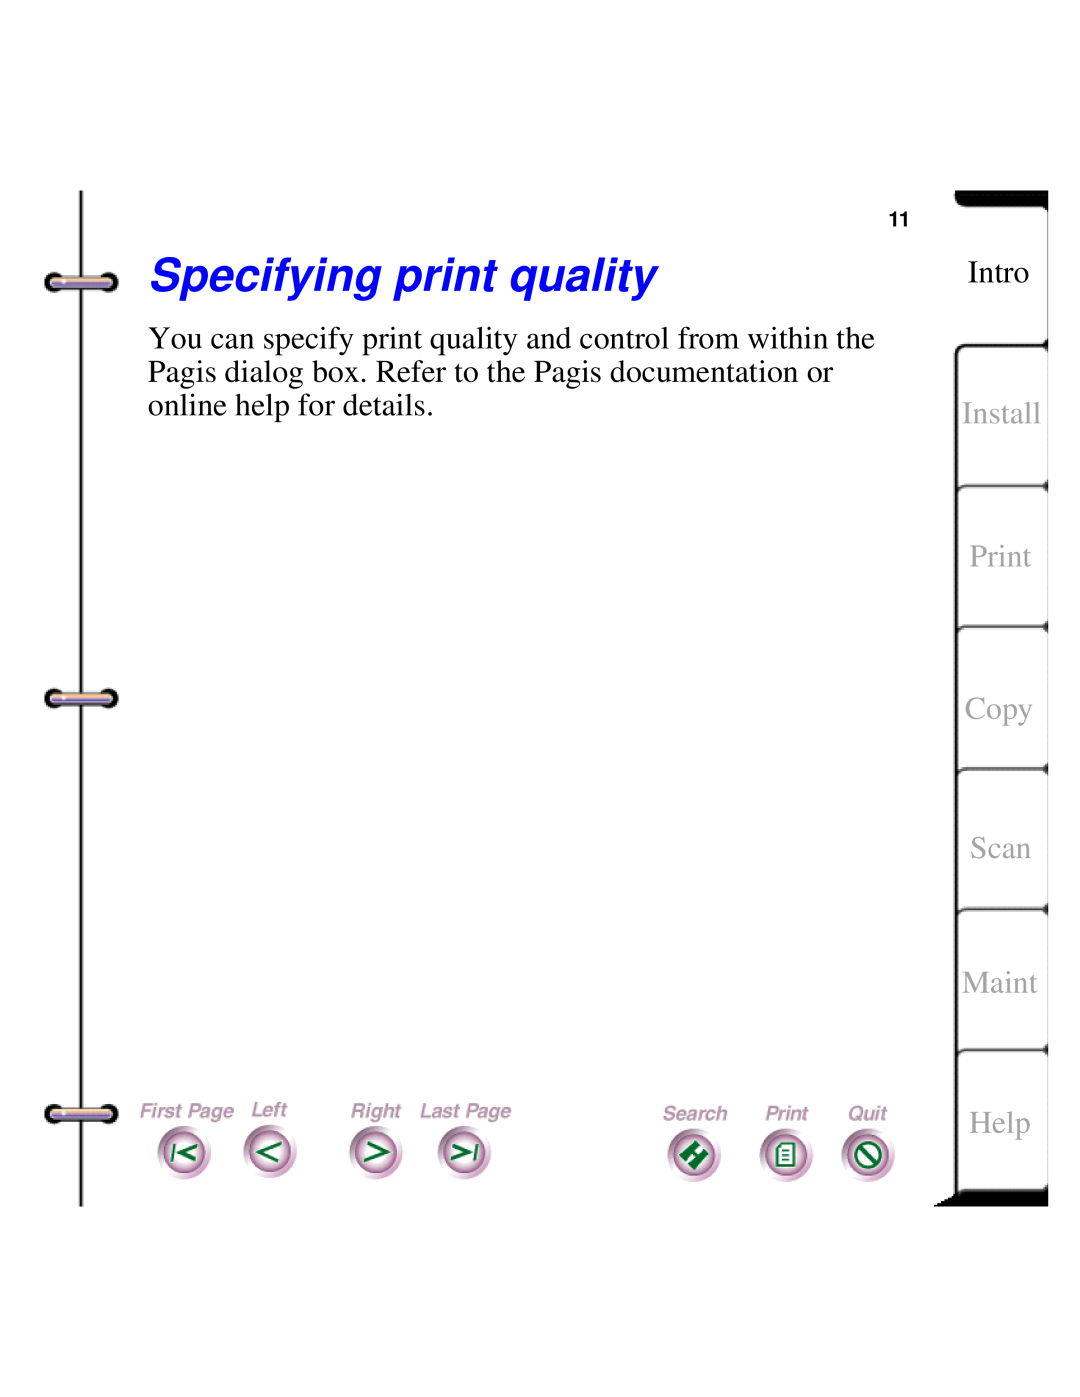 Xerox Document HomeCentre manual Specifying print quality, Intro, Install Print Copy Scan Maint, Help 